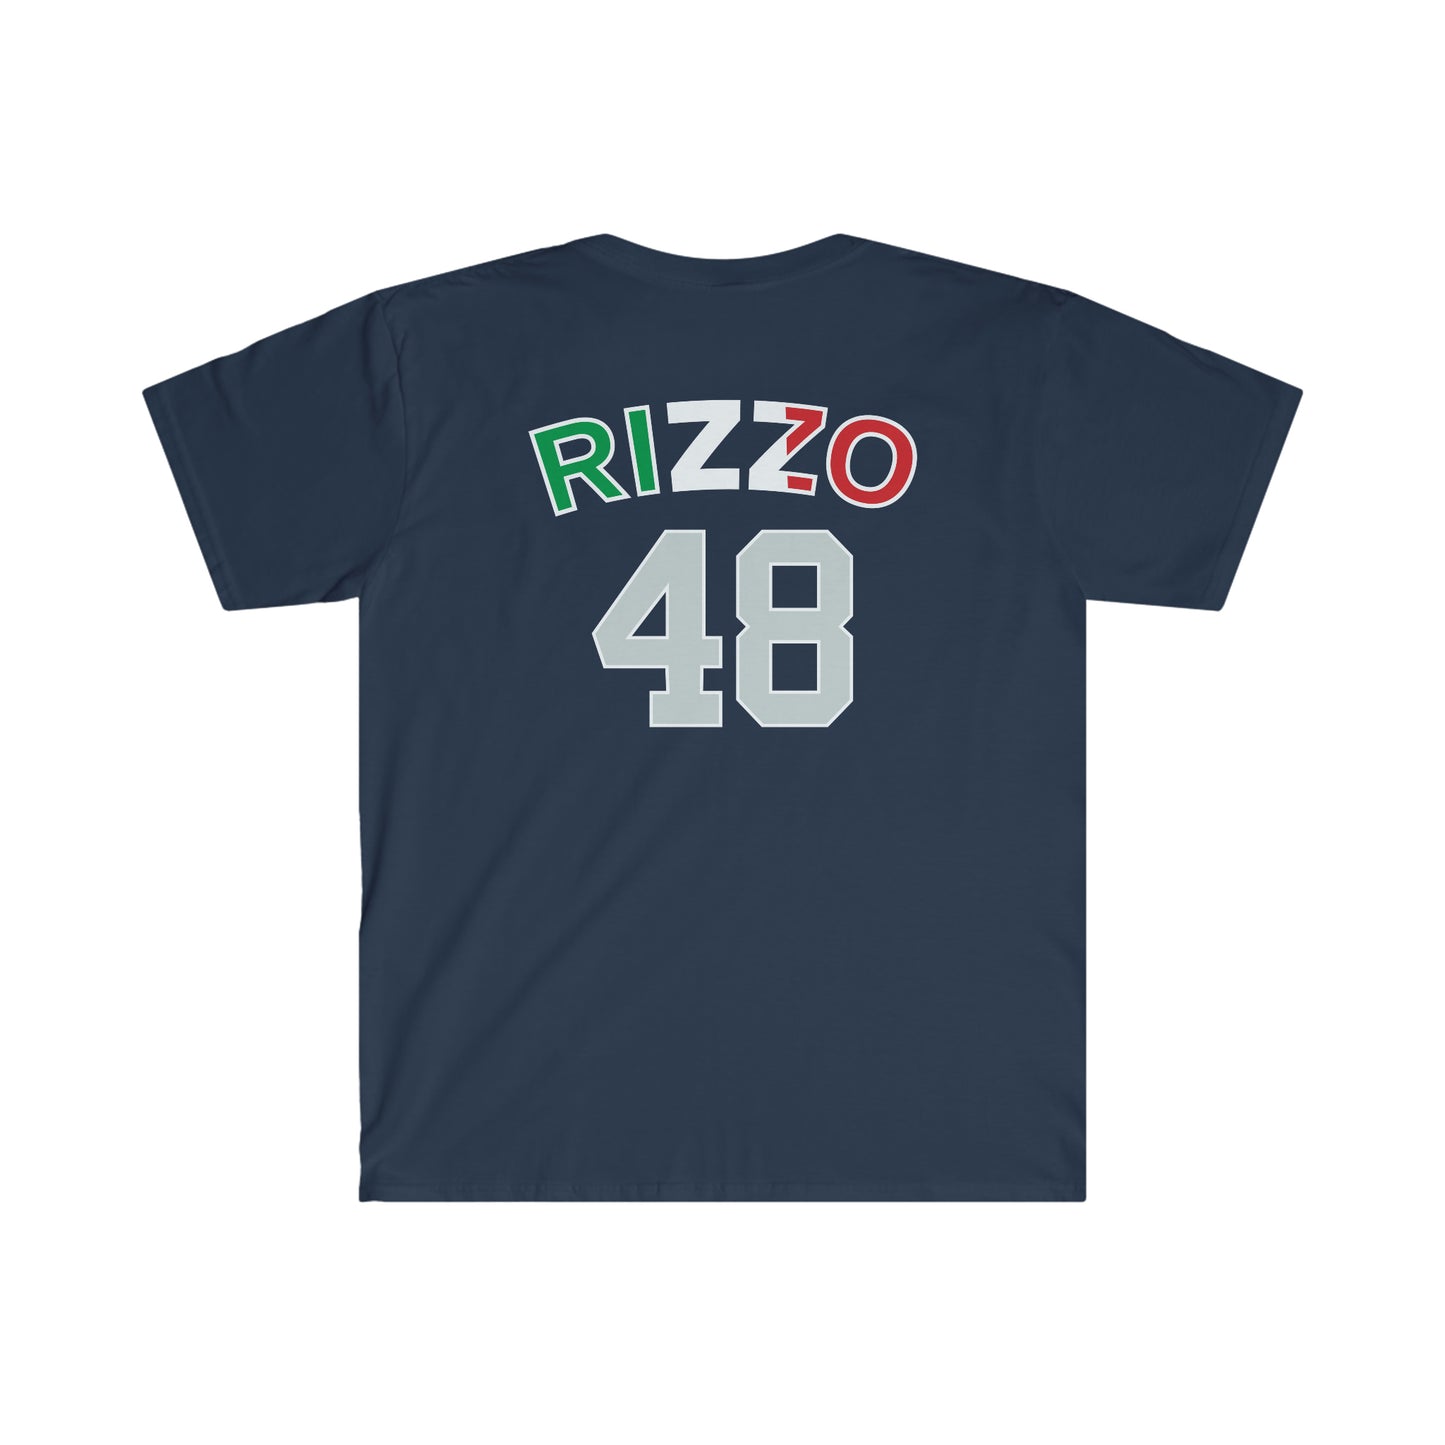 Anthony Rizzo - Unisex T-Shirt (front and back)